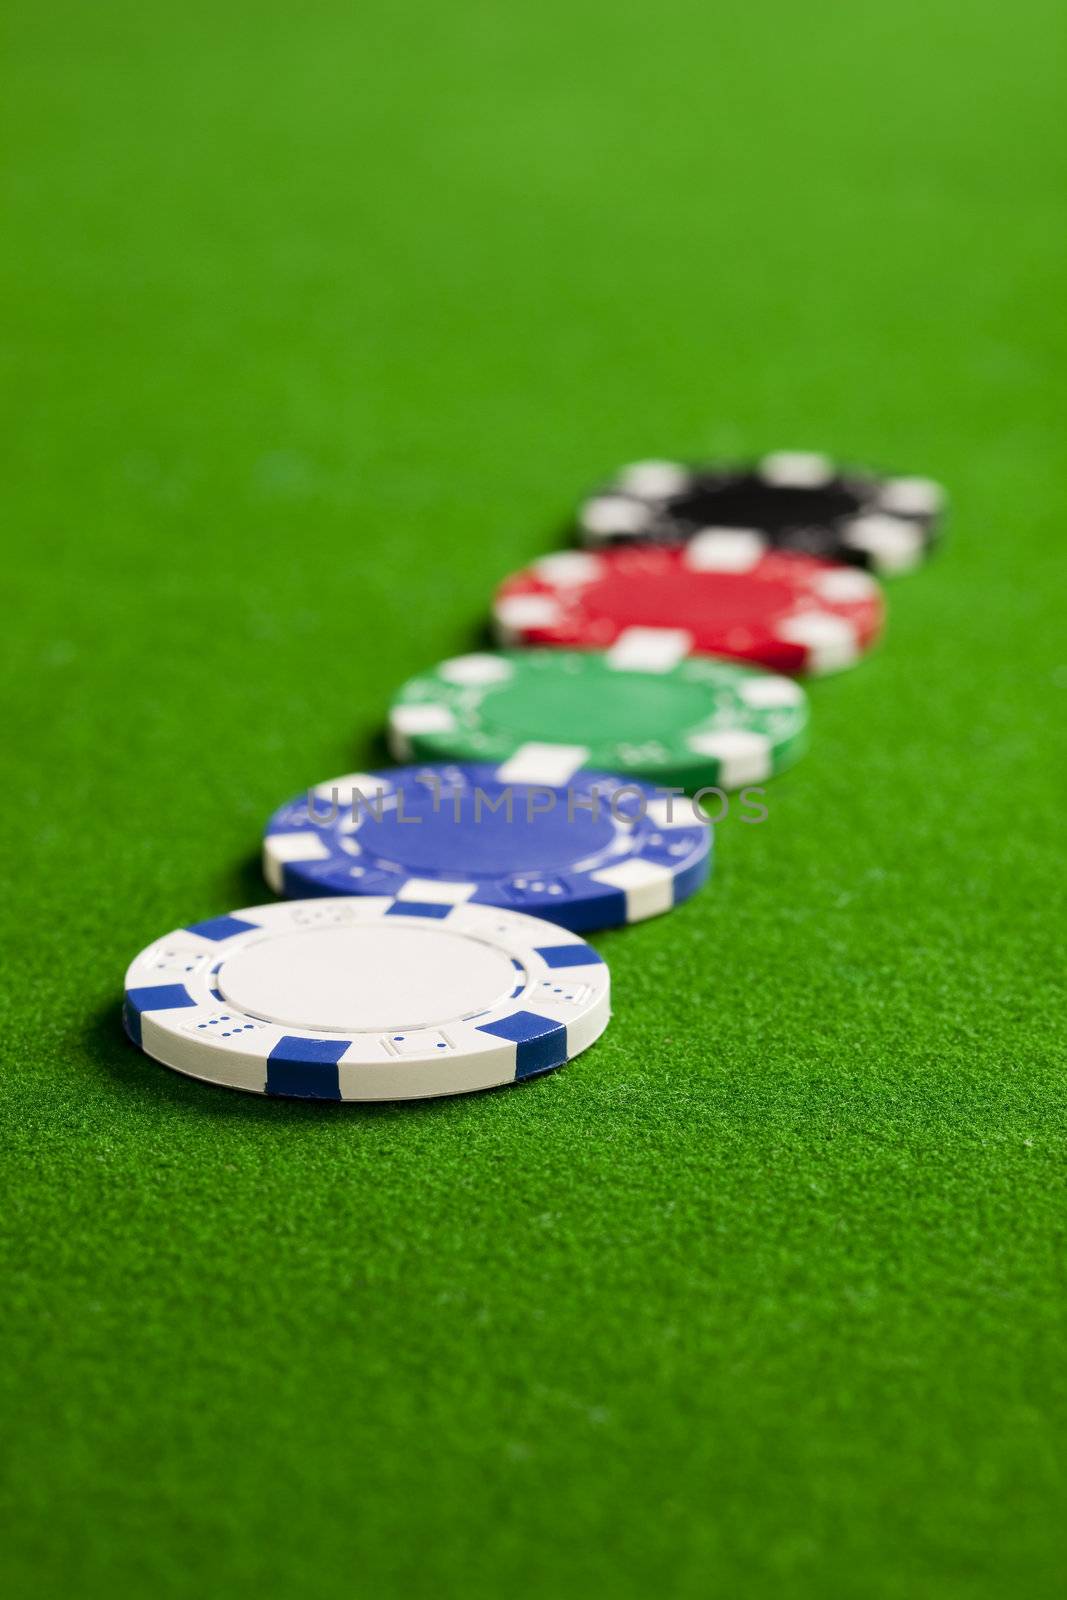 Blank casino chips on the green gaming table